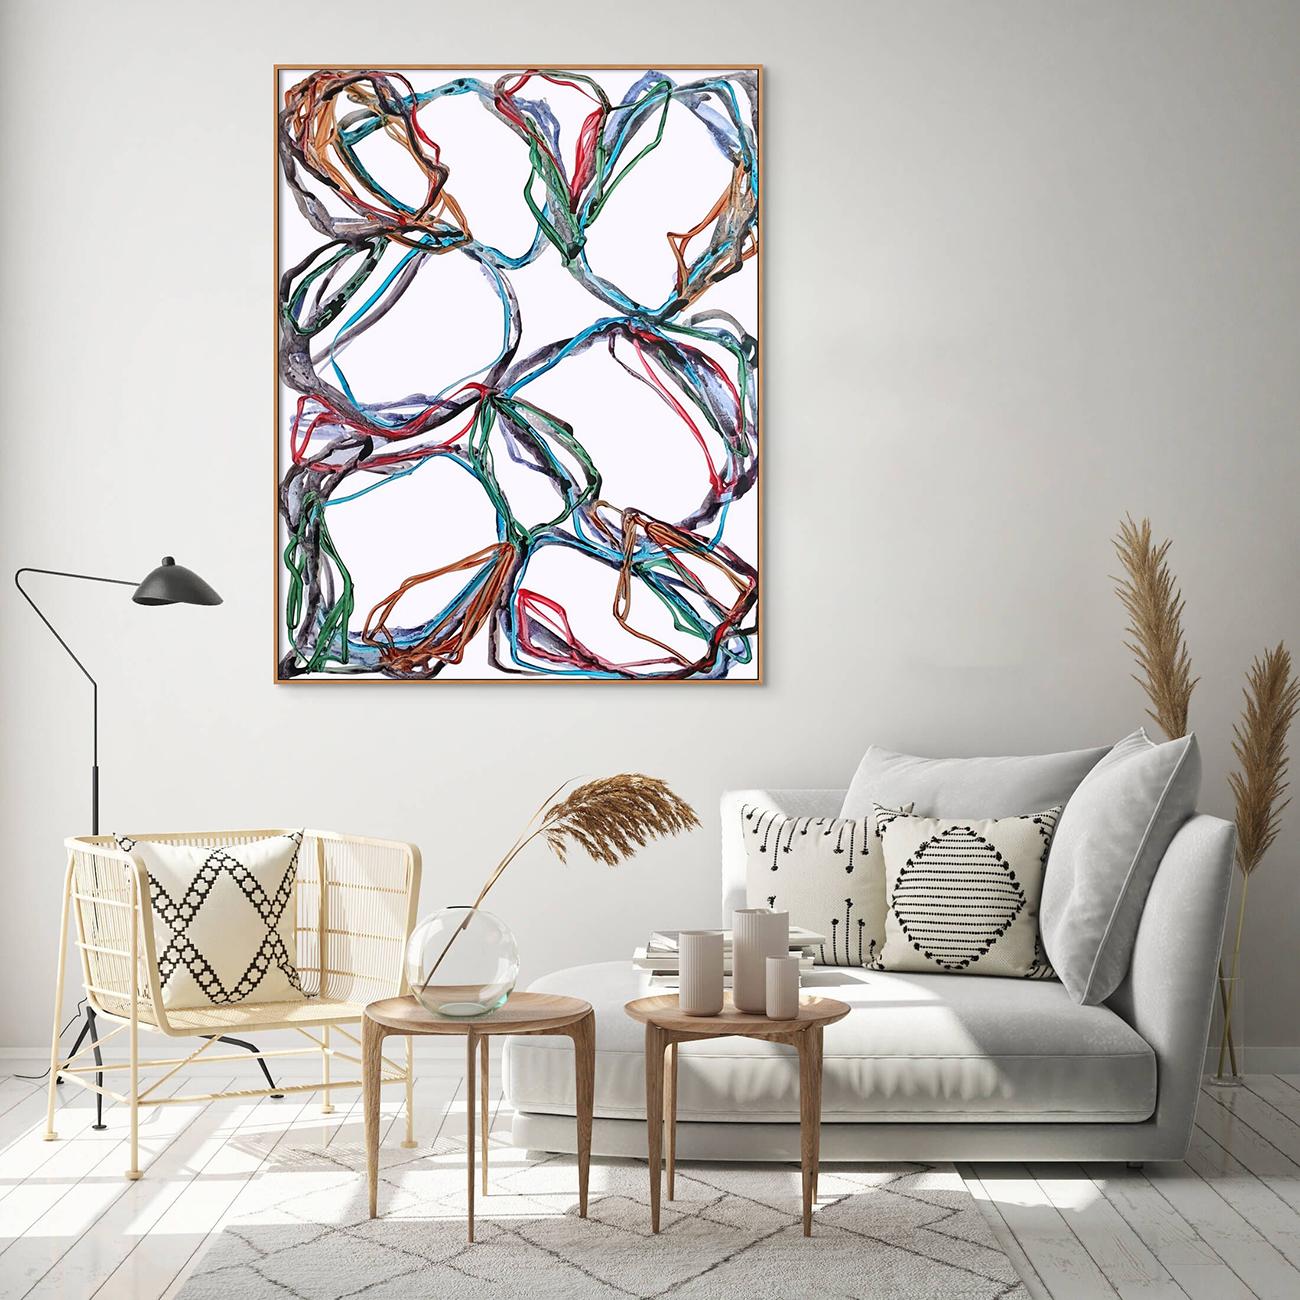 N°1148 (Abstract Painting)

Acrylic on transparent vinyl - unframed

Jean-Daniel Salvat is a French abstract artist based in Nîmes, France. 
He attended the Ecole Nationale Supérieure des Beaux-Arts under the directorship of the famous artist Claude